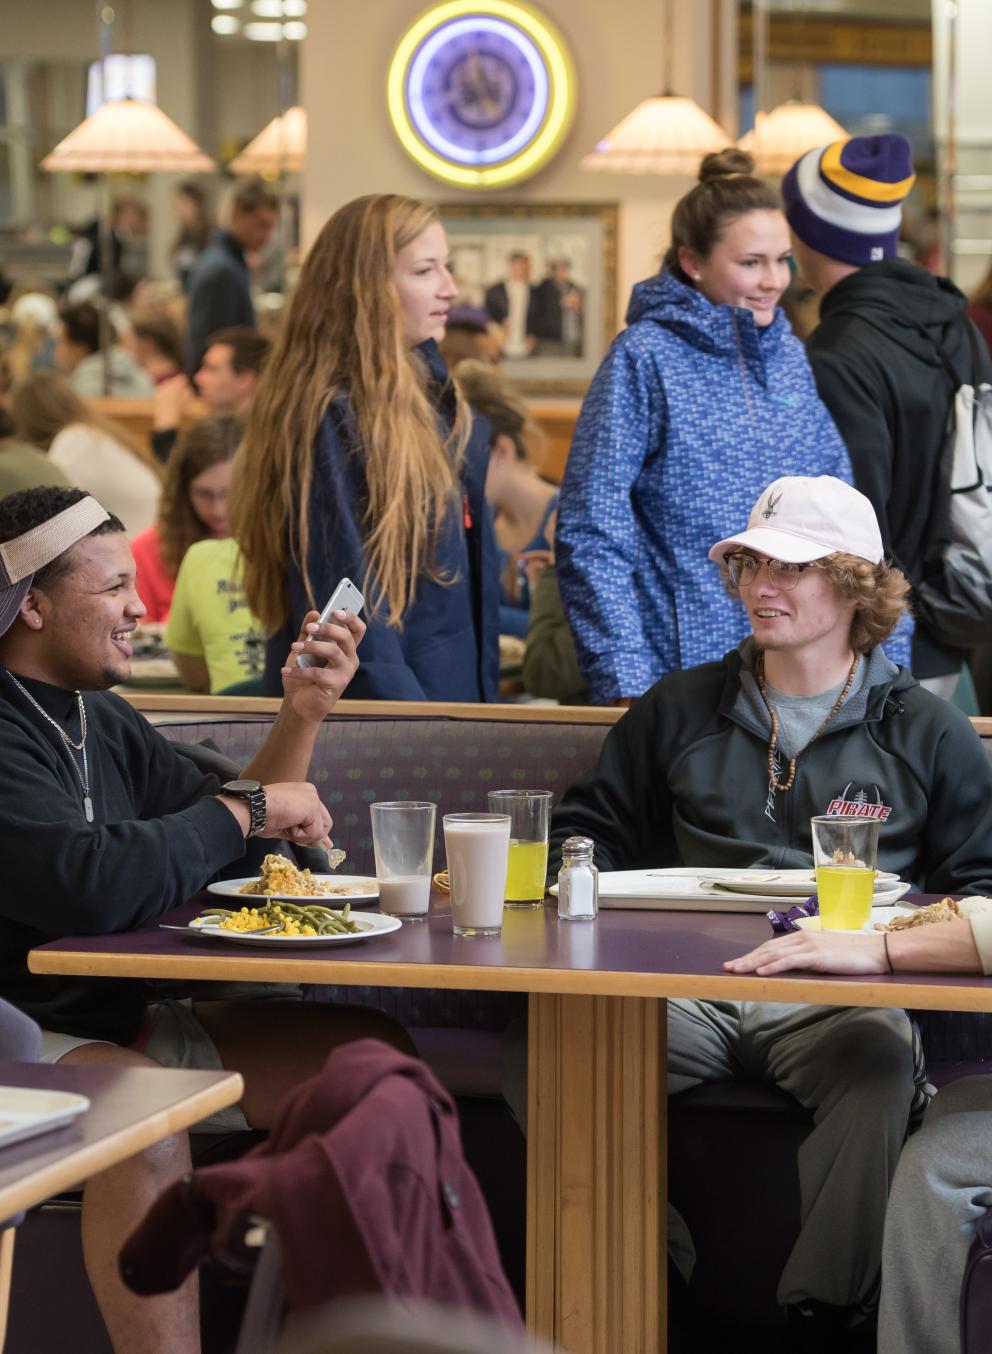 Student Dining